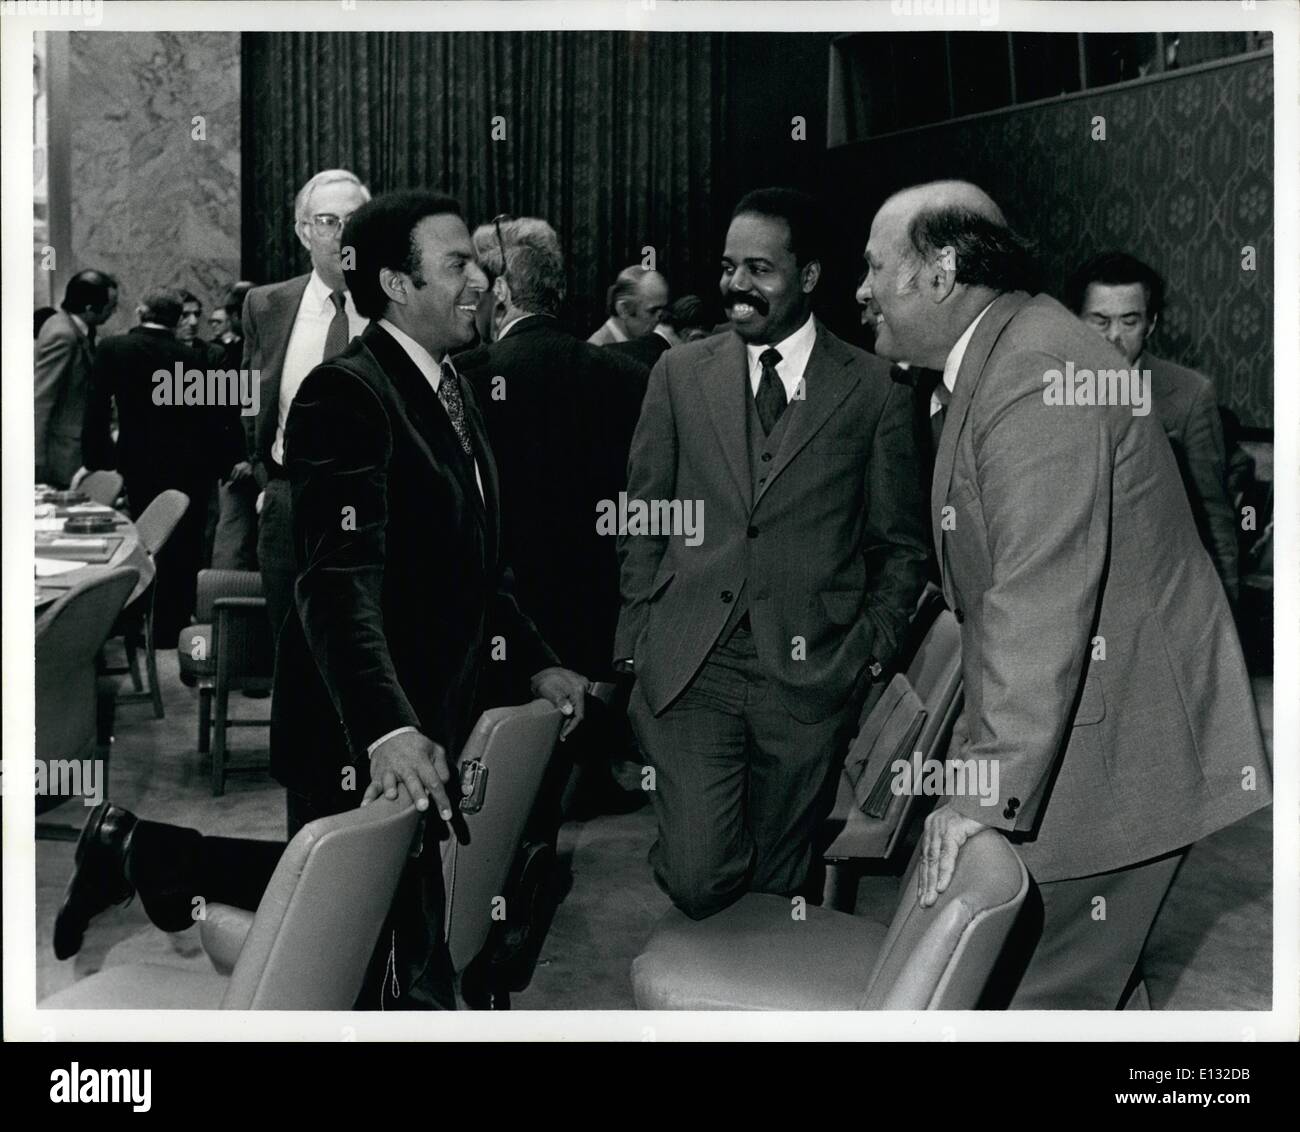 Feb. 26, 2012 - Saturday, Jan. 13th, 1979, the United Nations Security Council, New York, New York. Left to right: United States Ambassador Andrew Young, U.S. Ambassador Donald F. McHenry and Colin Eglin, Leader of the South African Opposition Party, the Progressive Federal Party, talking prior to the beginning of the Councils debate on Democratic Kampuchea (Cambodia) Stock Photo